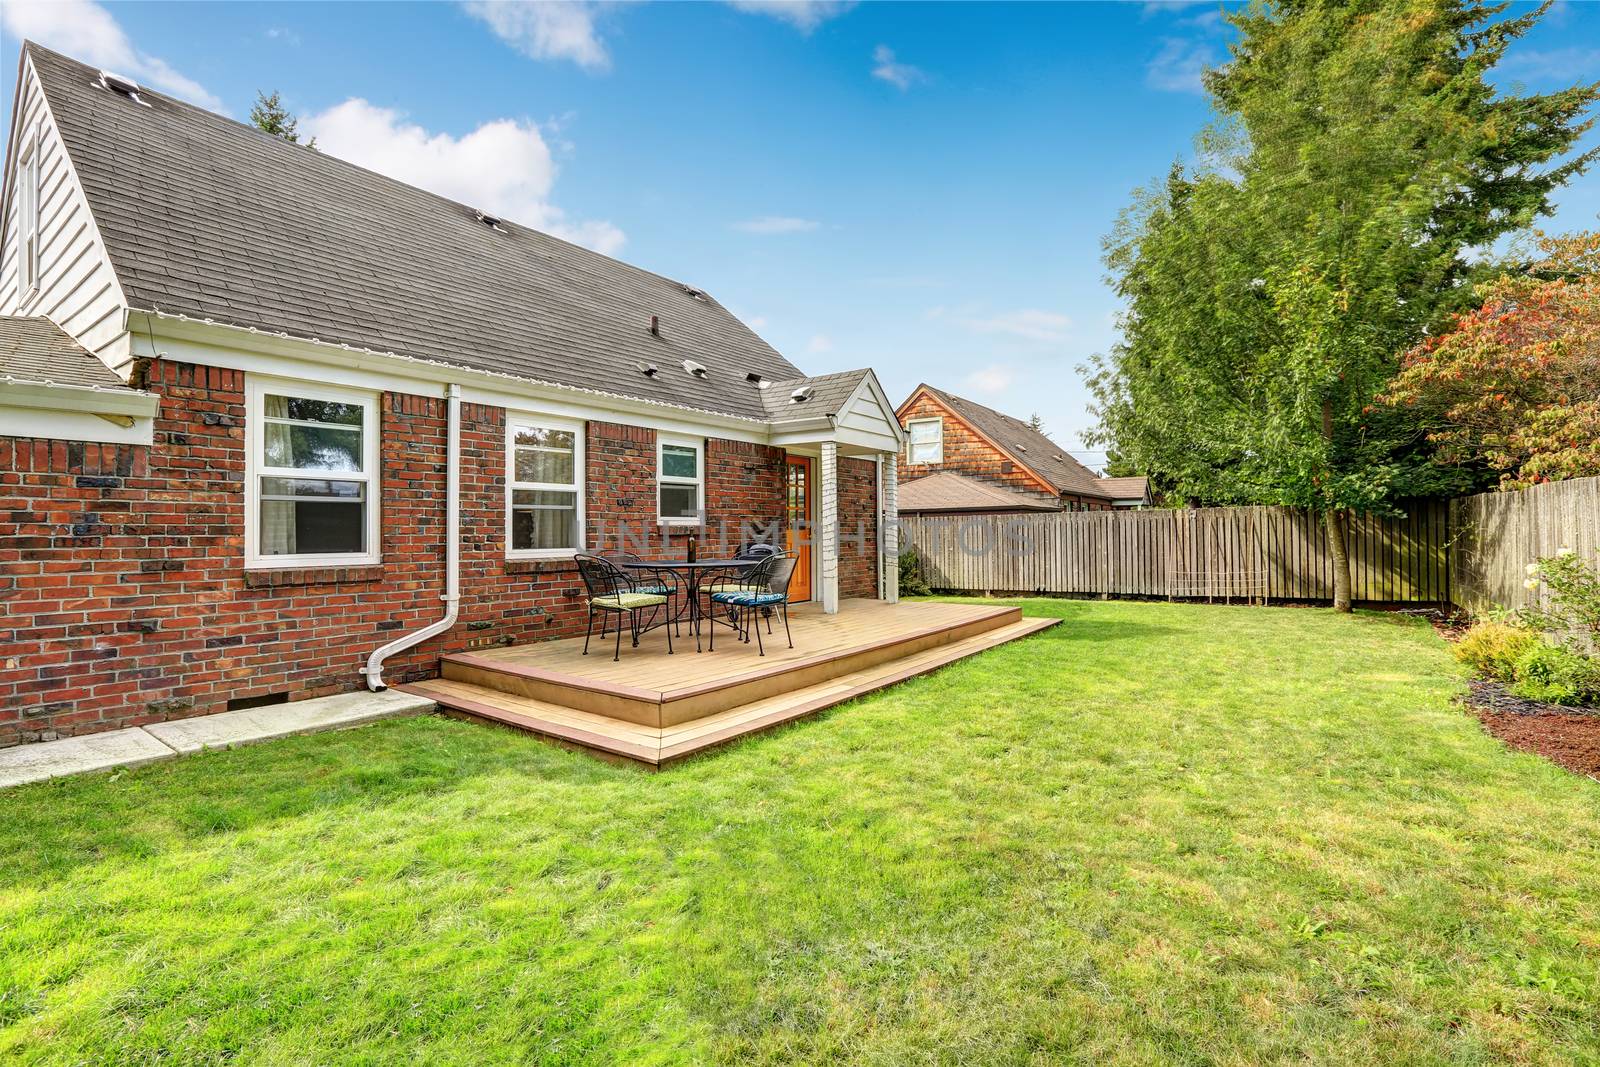 Brick house exterior with walkout wooden deck and patio area with barbecue